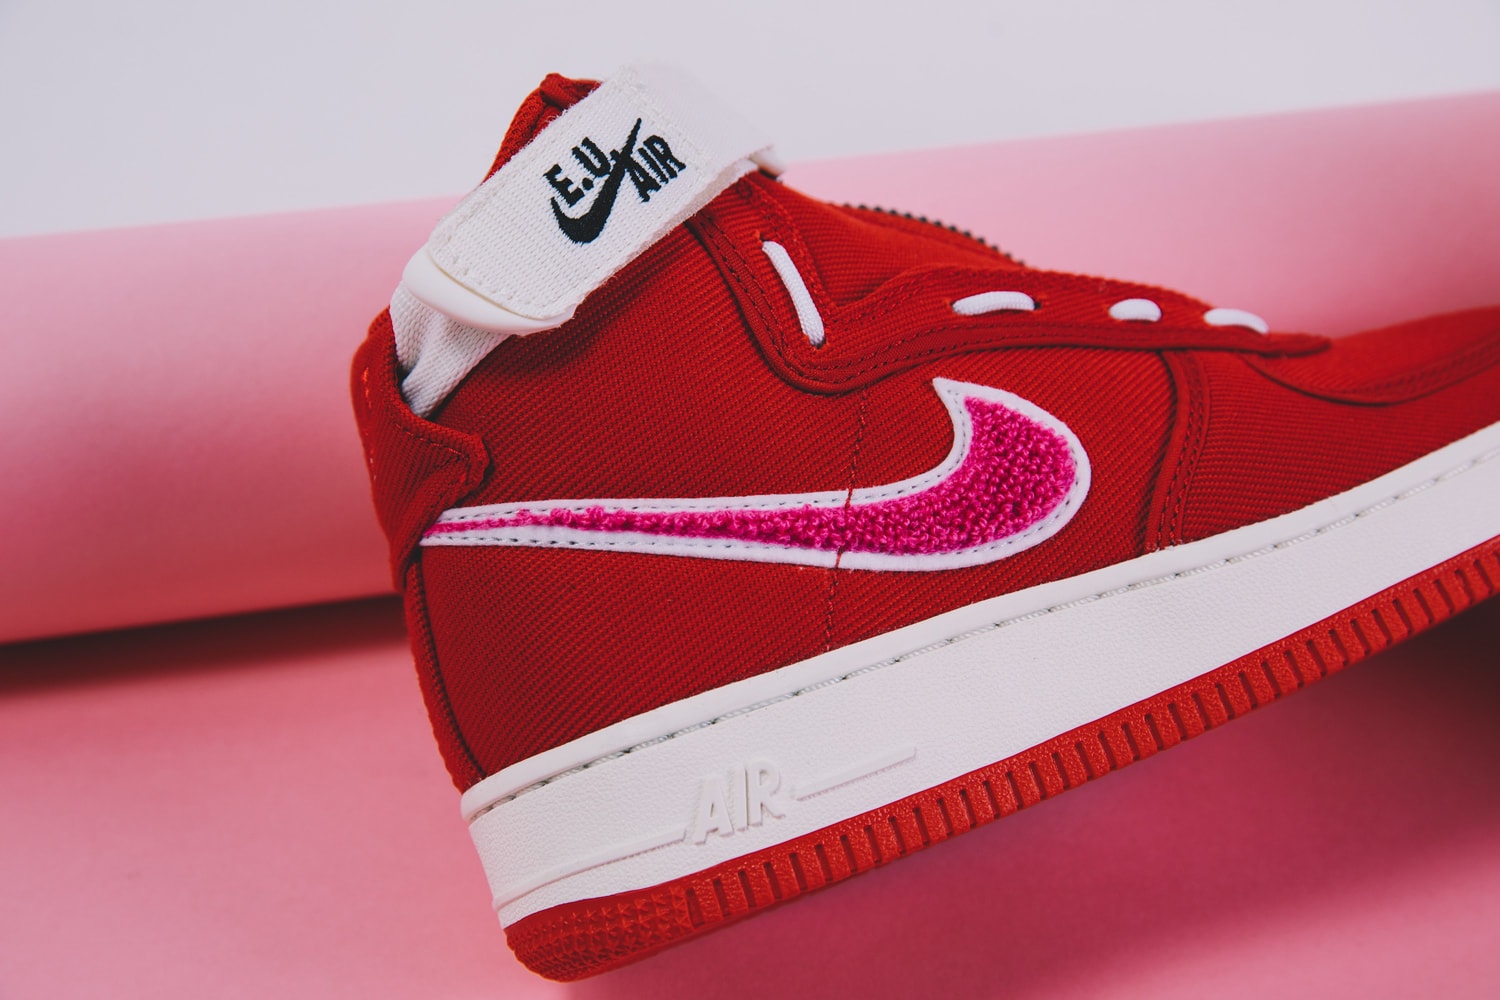 Emotionally Unavailable Nike Air Force 1 High Valentines Day Closer Look red white pink release info date KB Lee Edison Chen